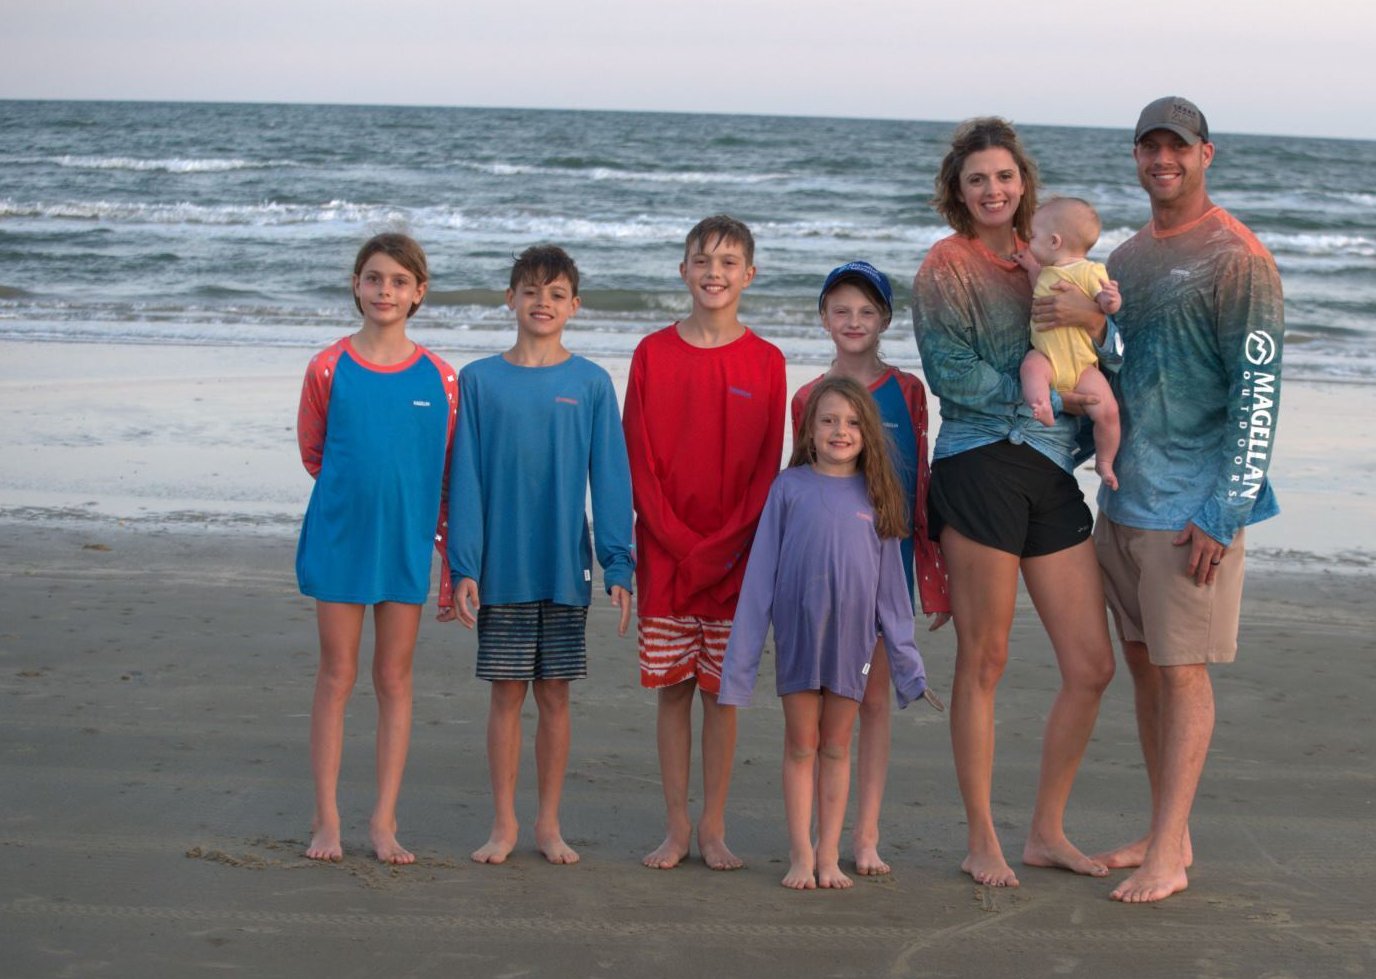 My Family at the Beach